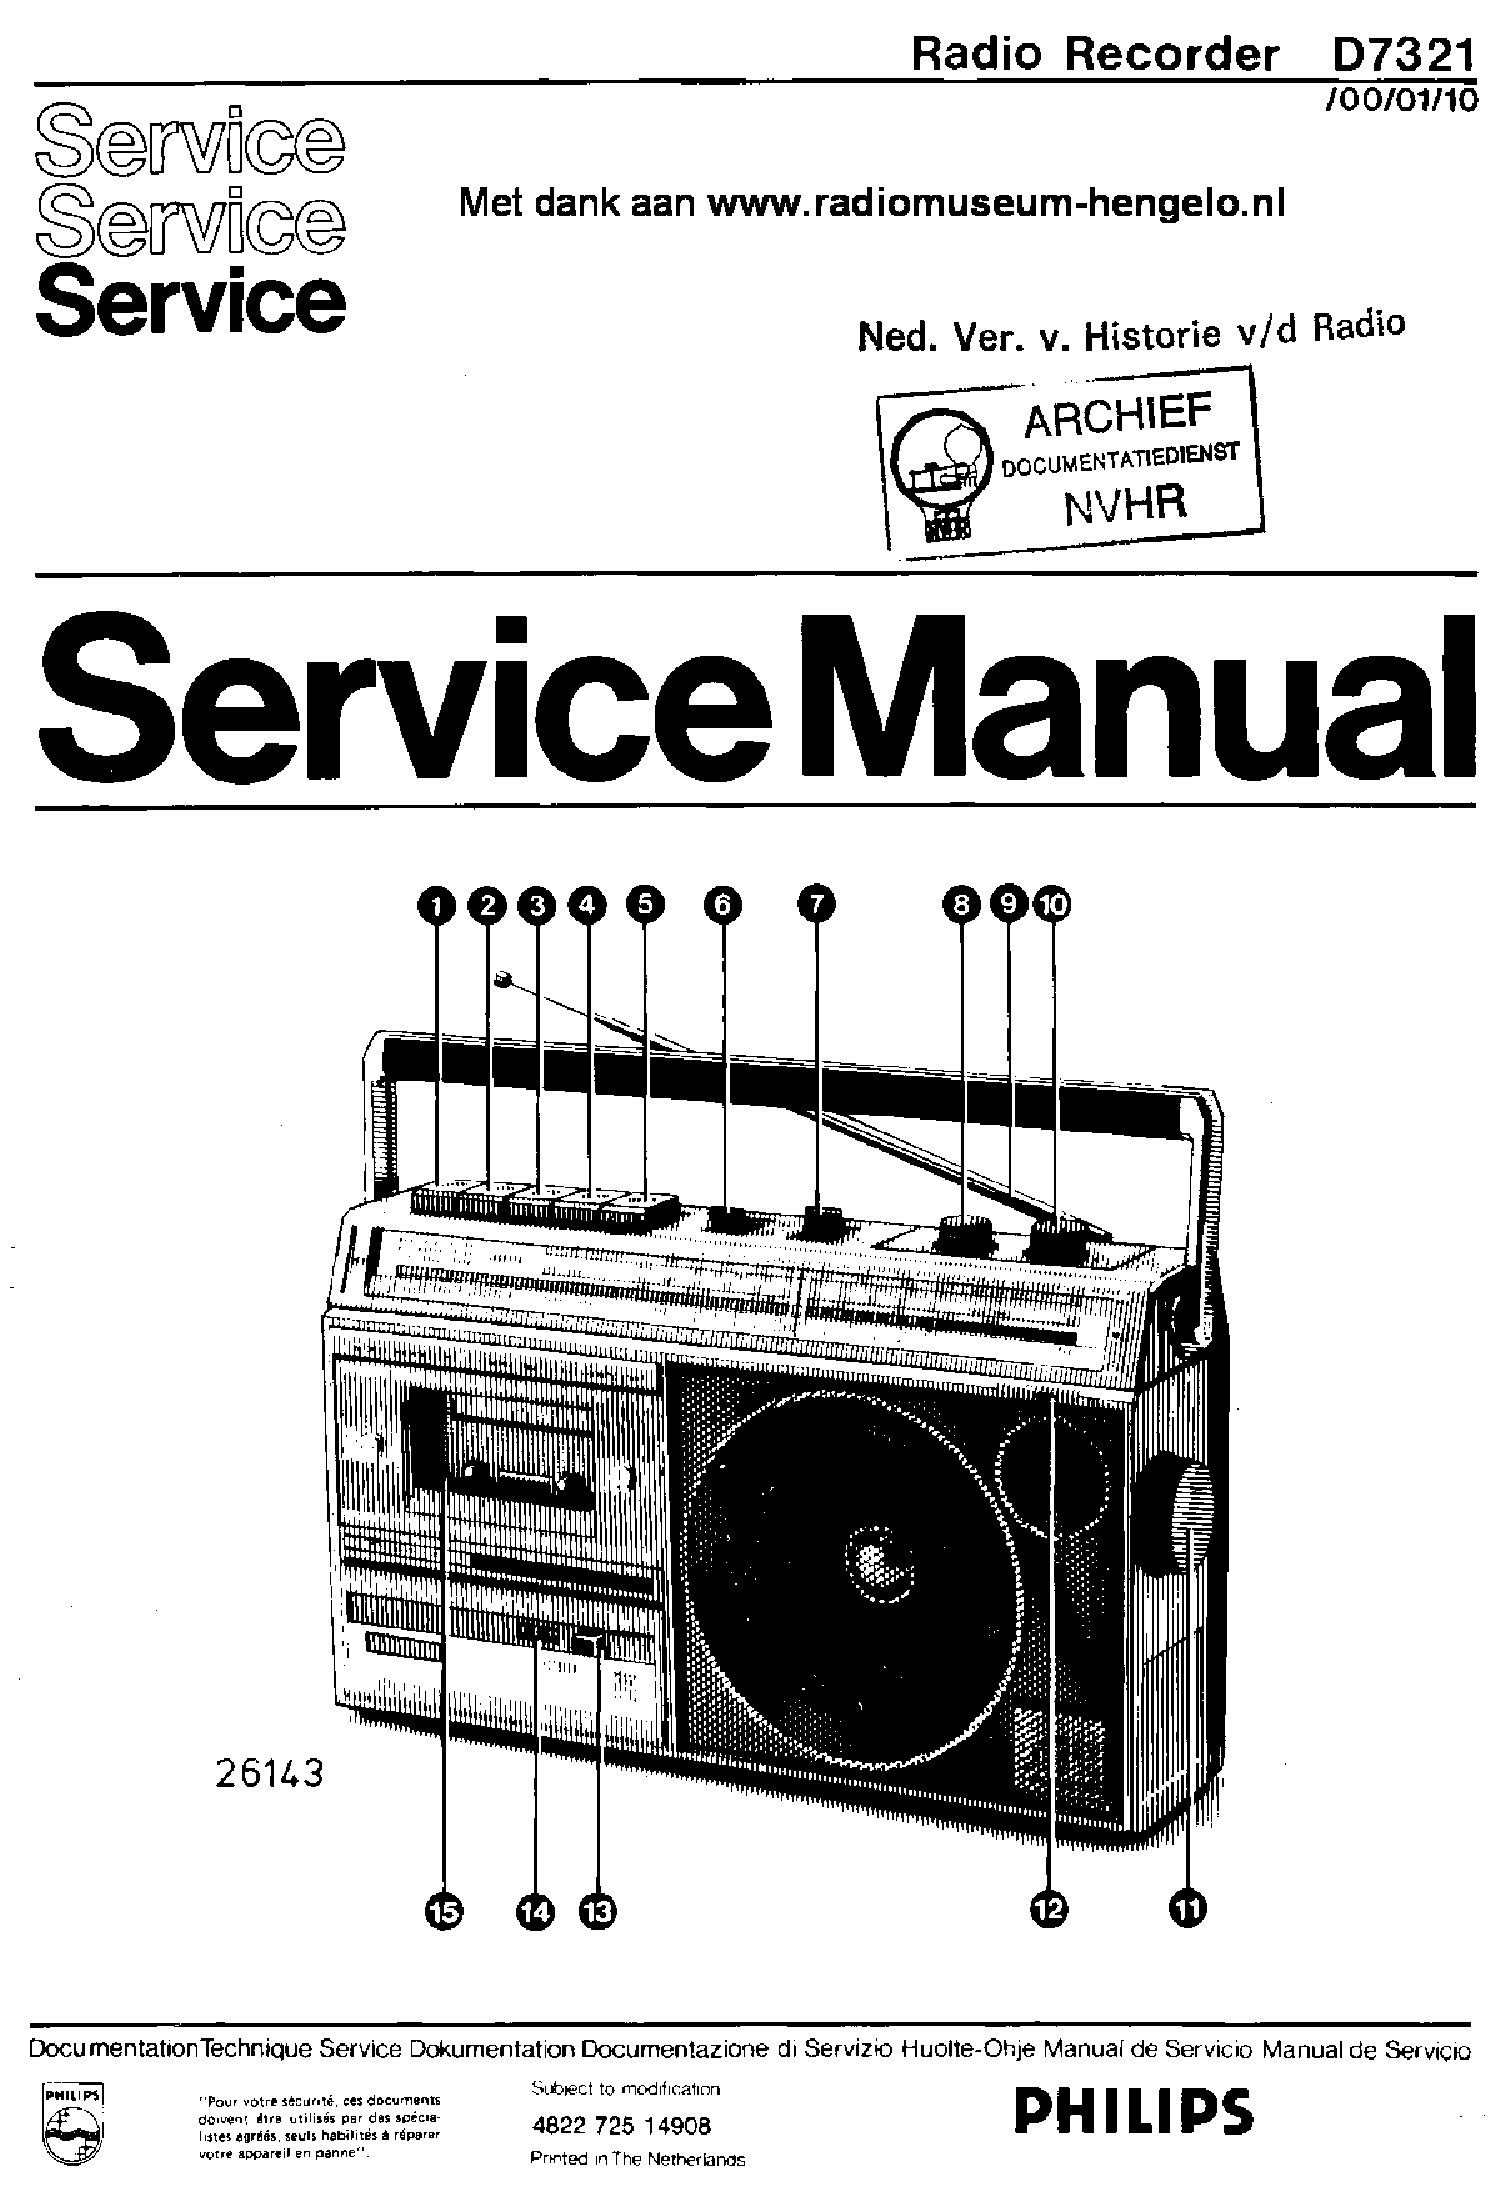 PHILIPS D7321-00-01-10 AM-FM RADIO RECORDER 1983 SM service manual (1st page)